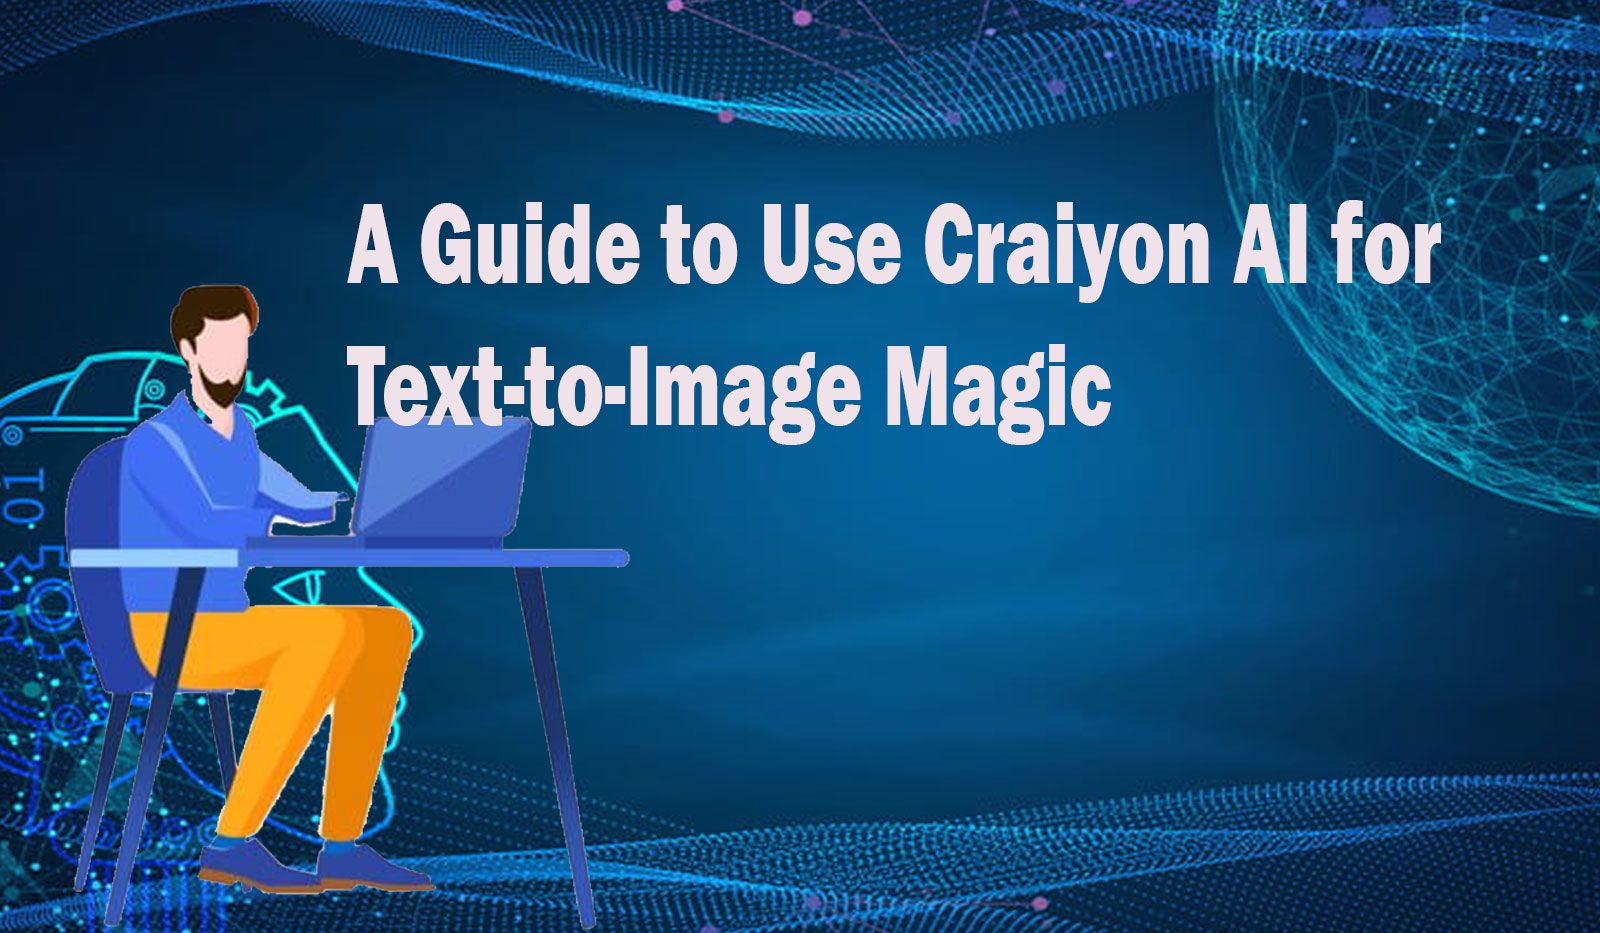 A Guide to Use Craiyon AI for Text-to-Image Magic